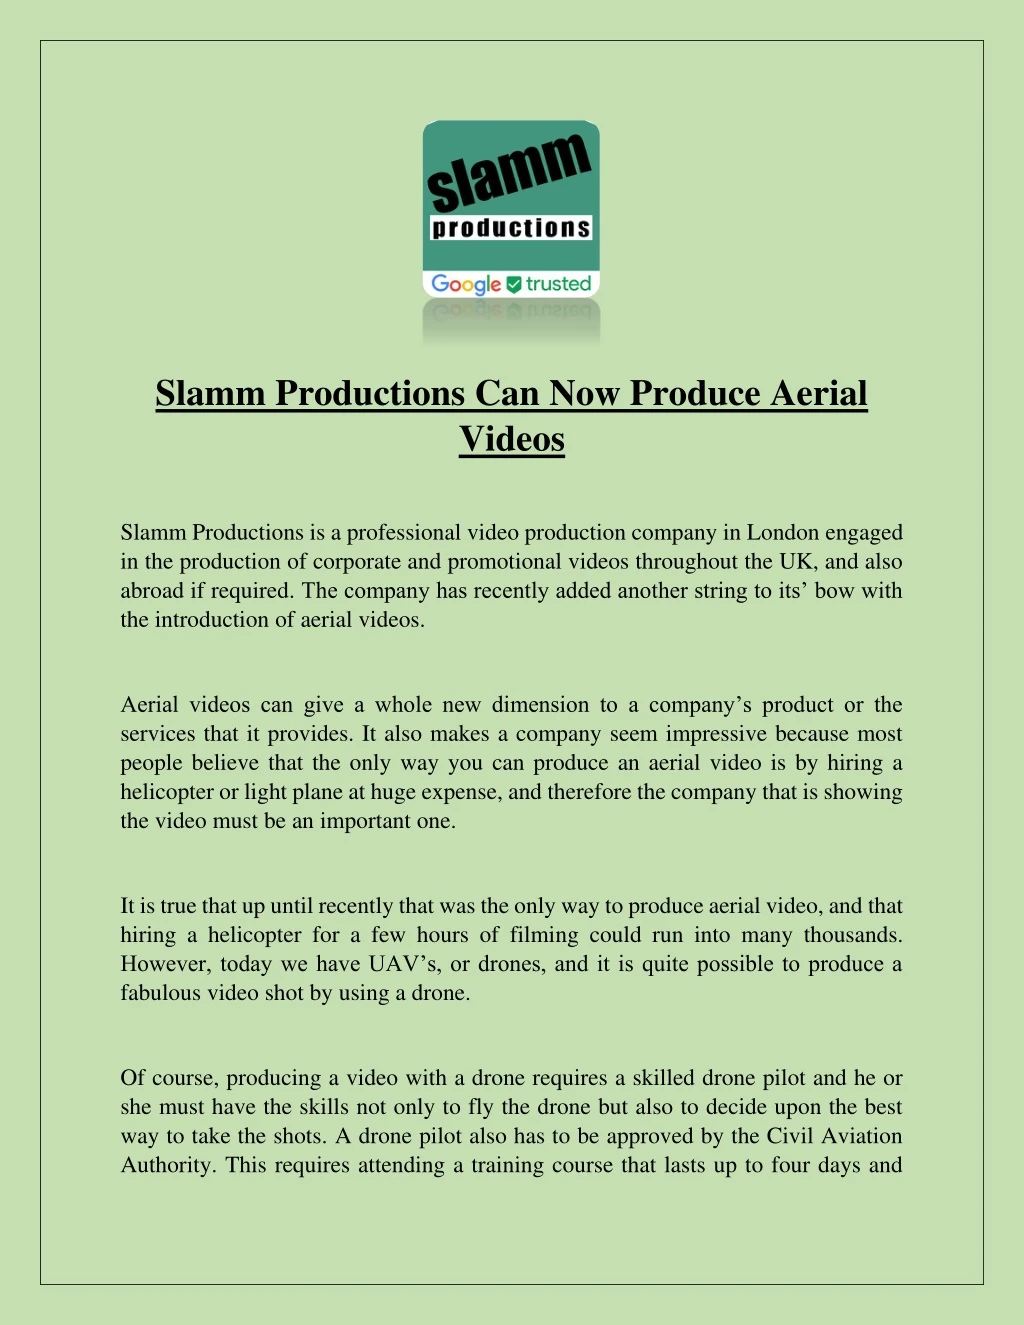 slamm productions can now produce aerial videos